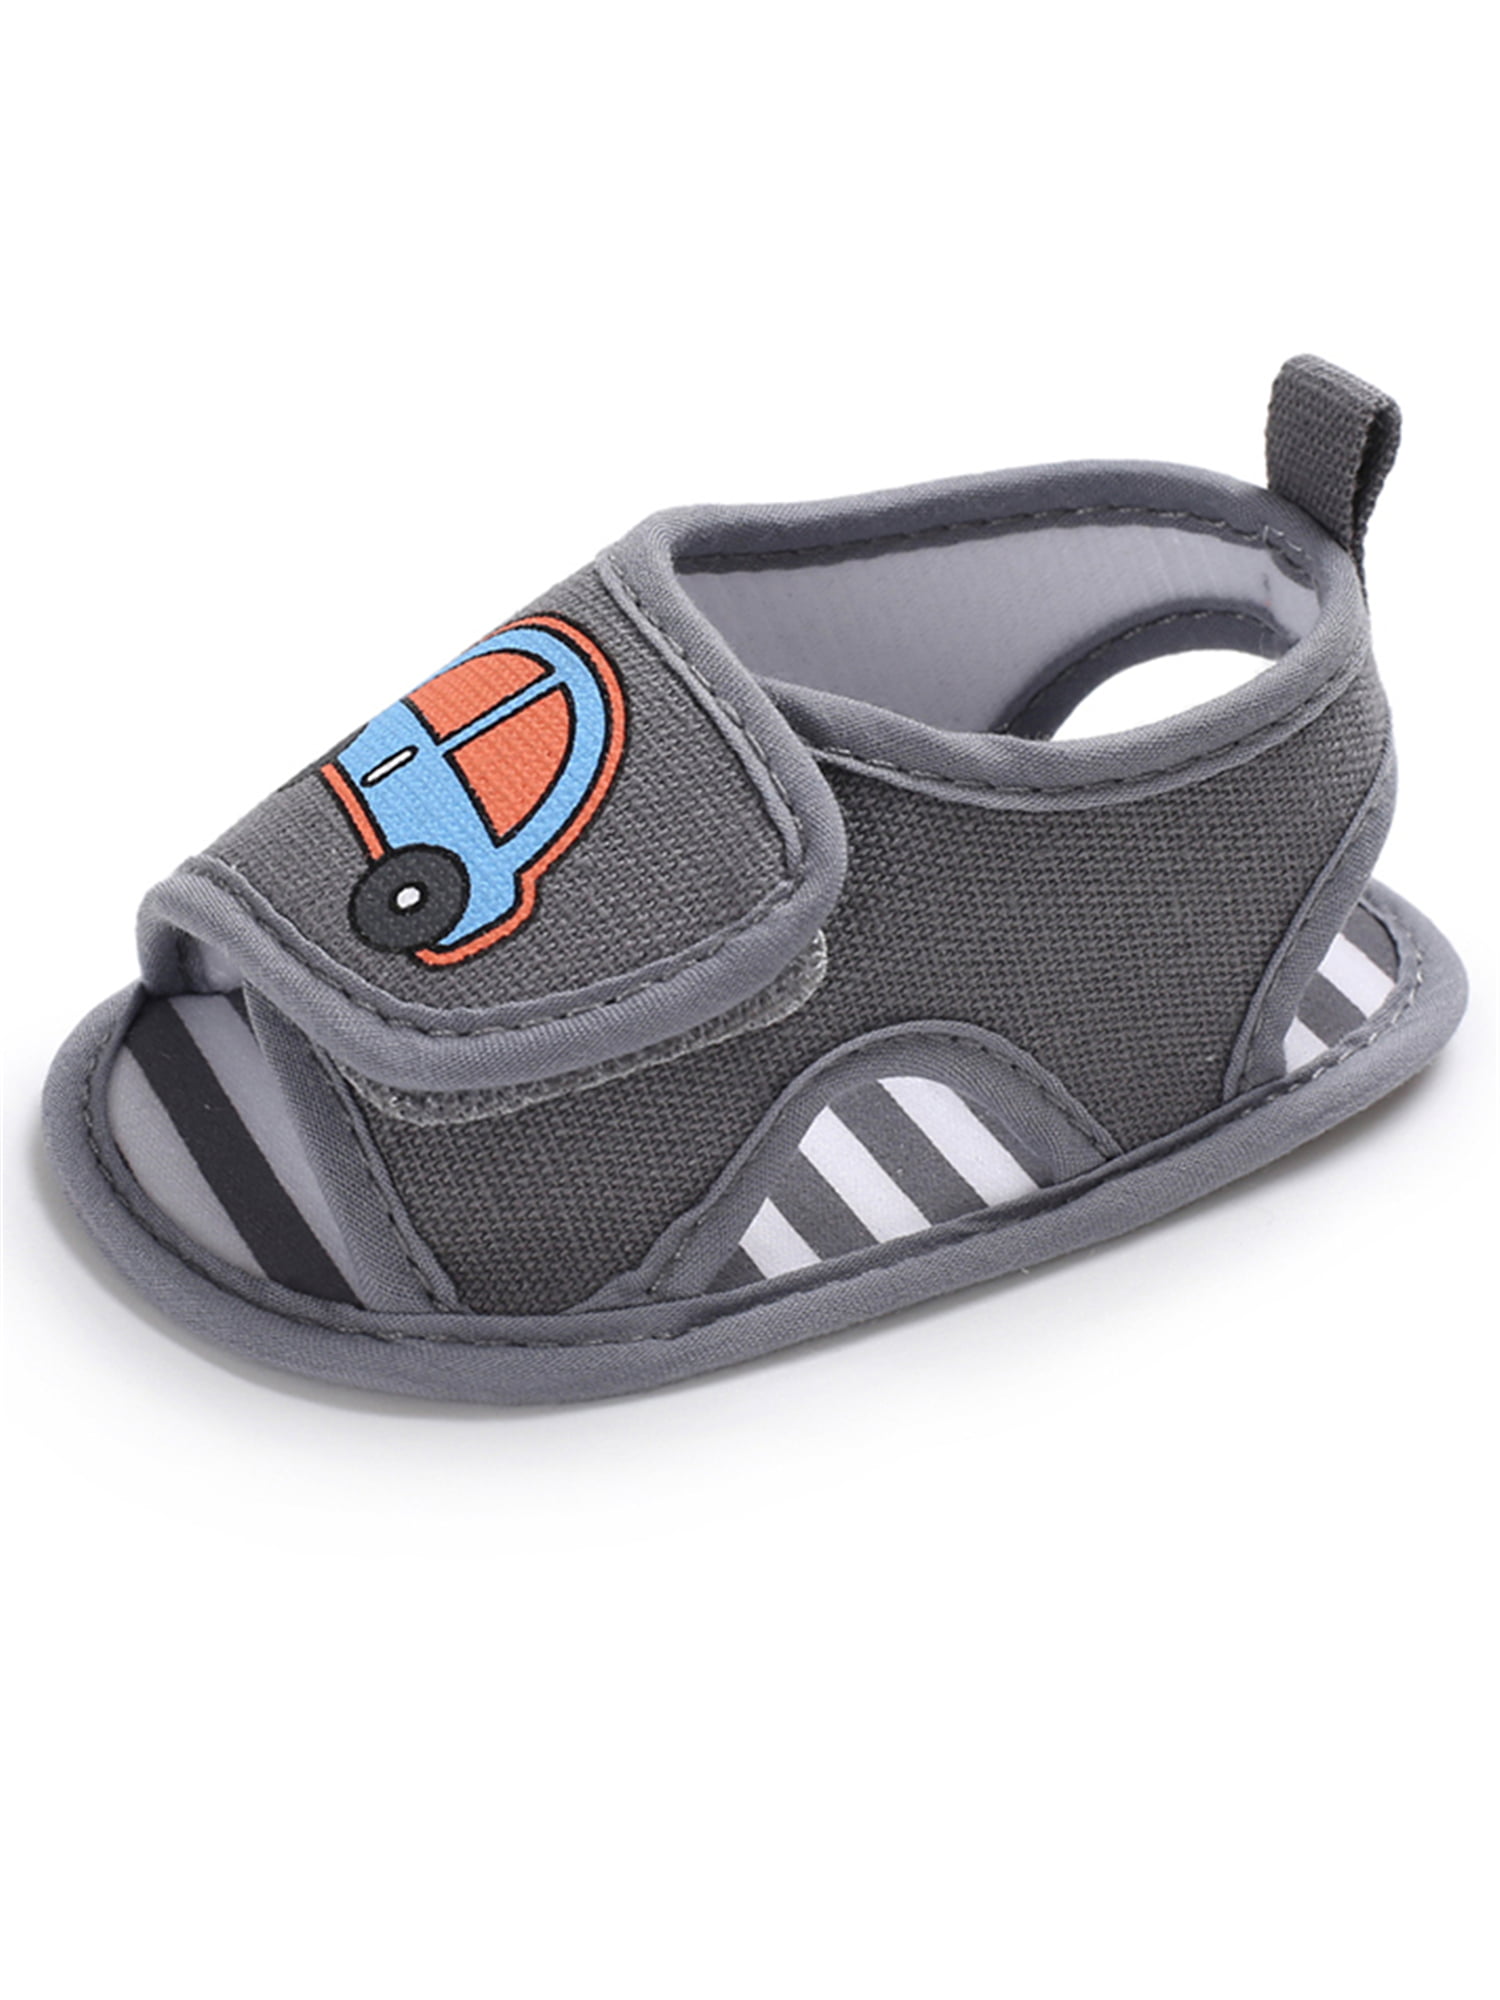 Infant Baby Boys Girls Summer Sandals Anti-Slip Rubber Sole First Walkers Crib Shoes